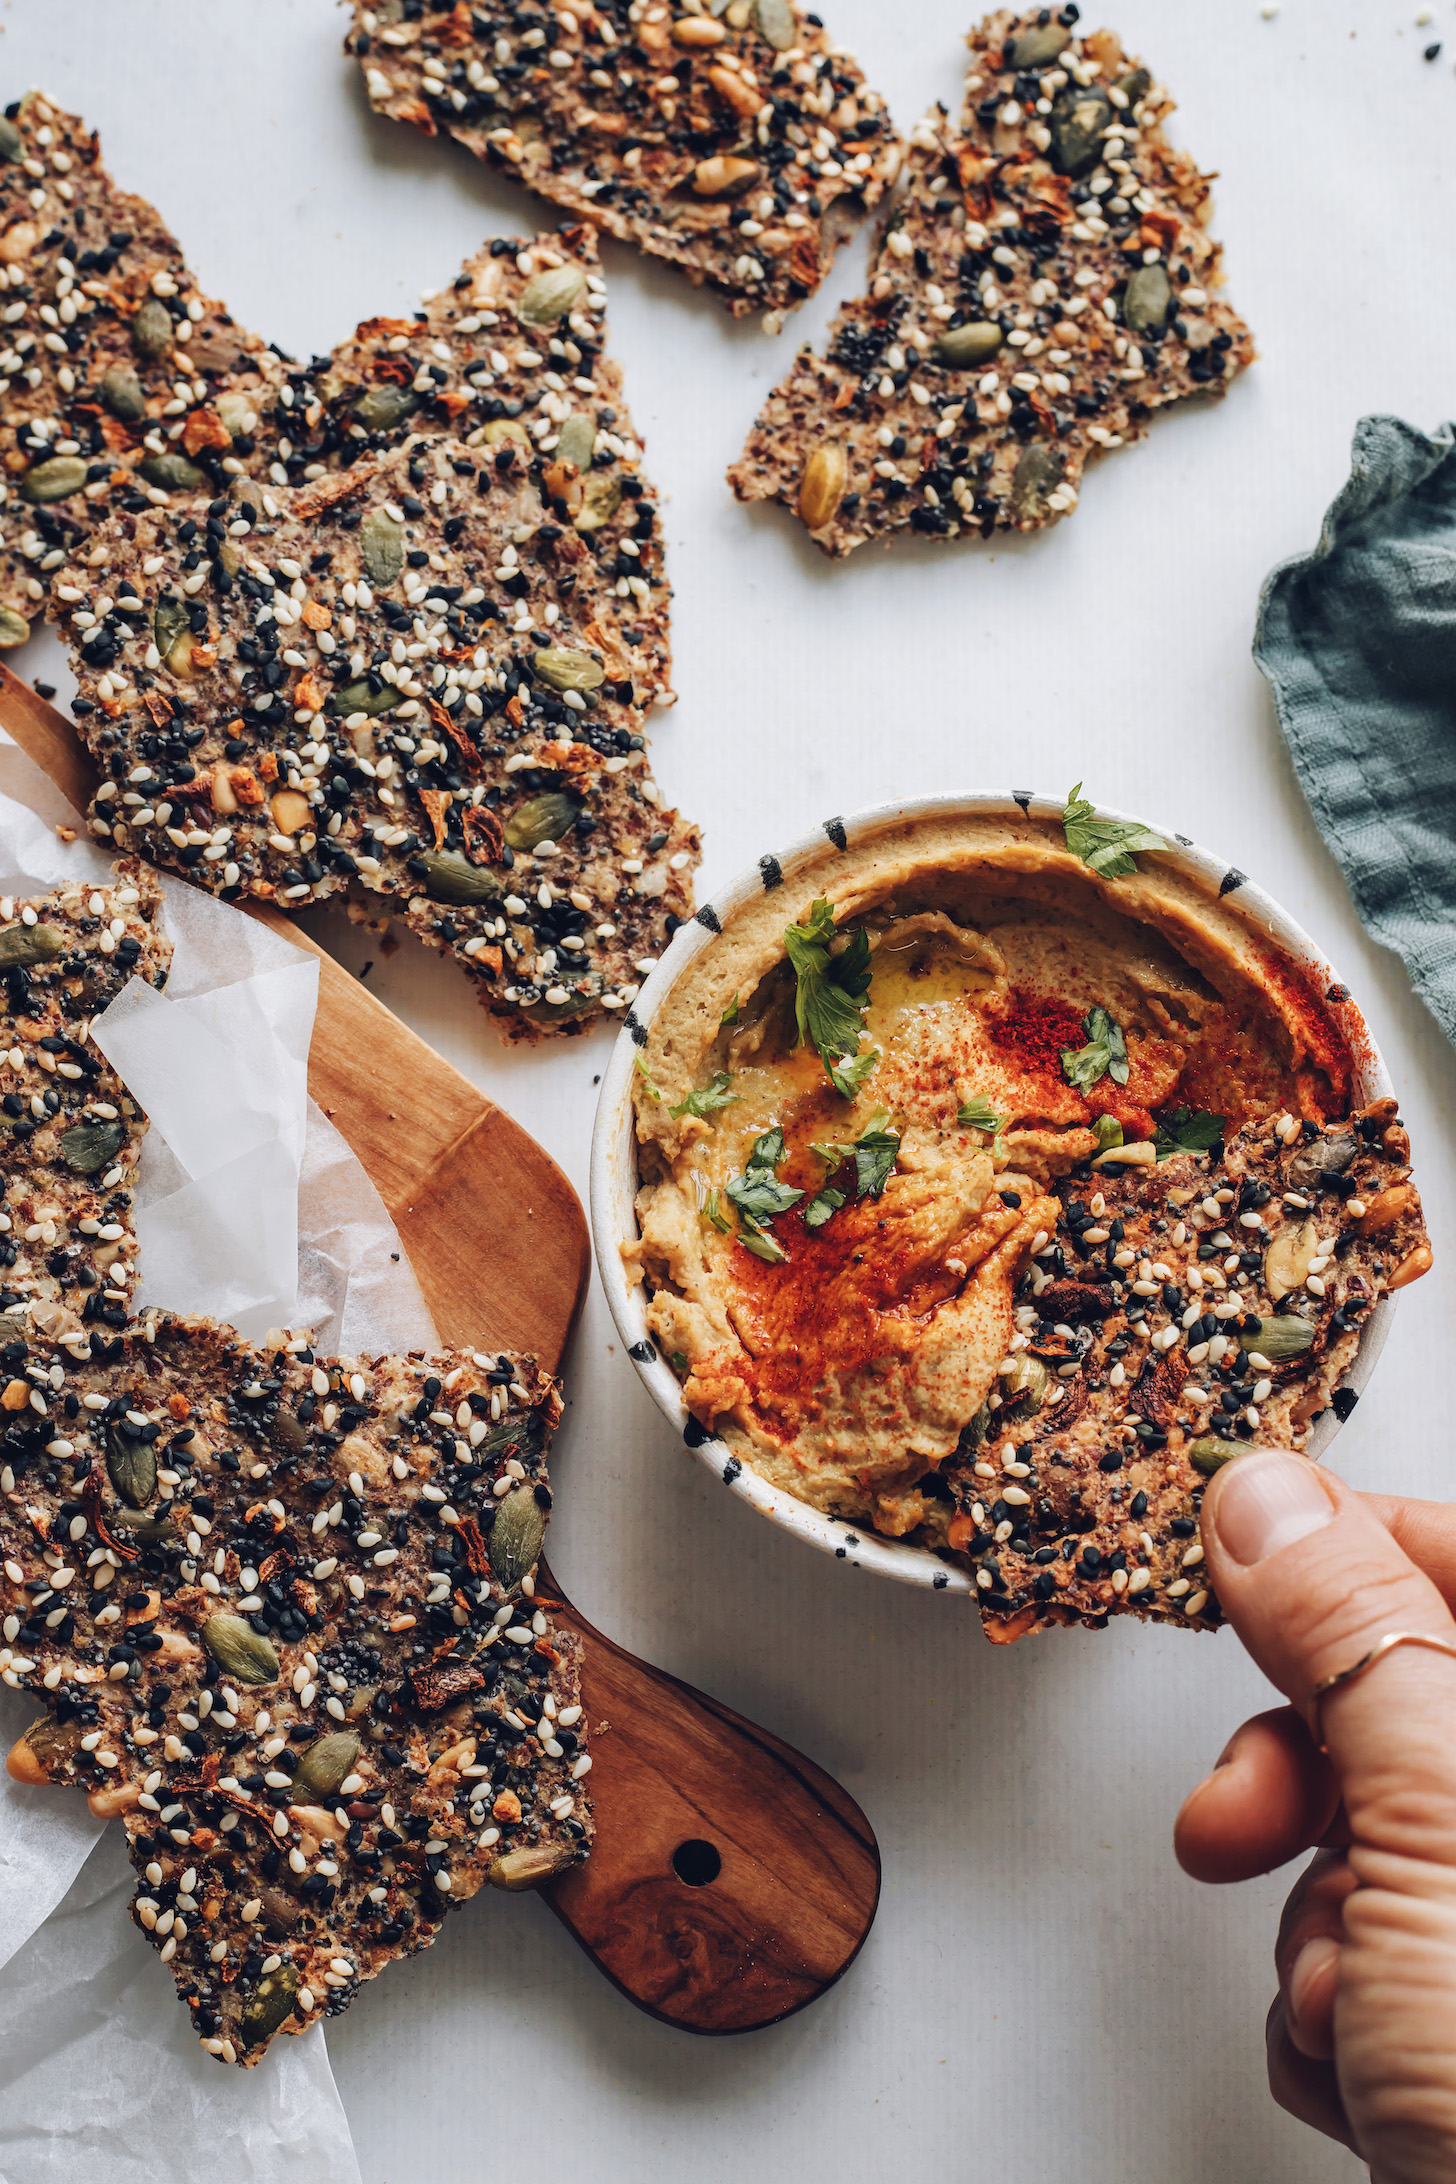 Dipping a seed cracker into hummus